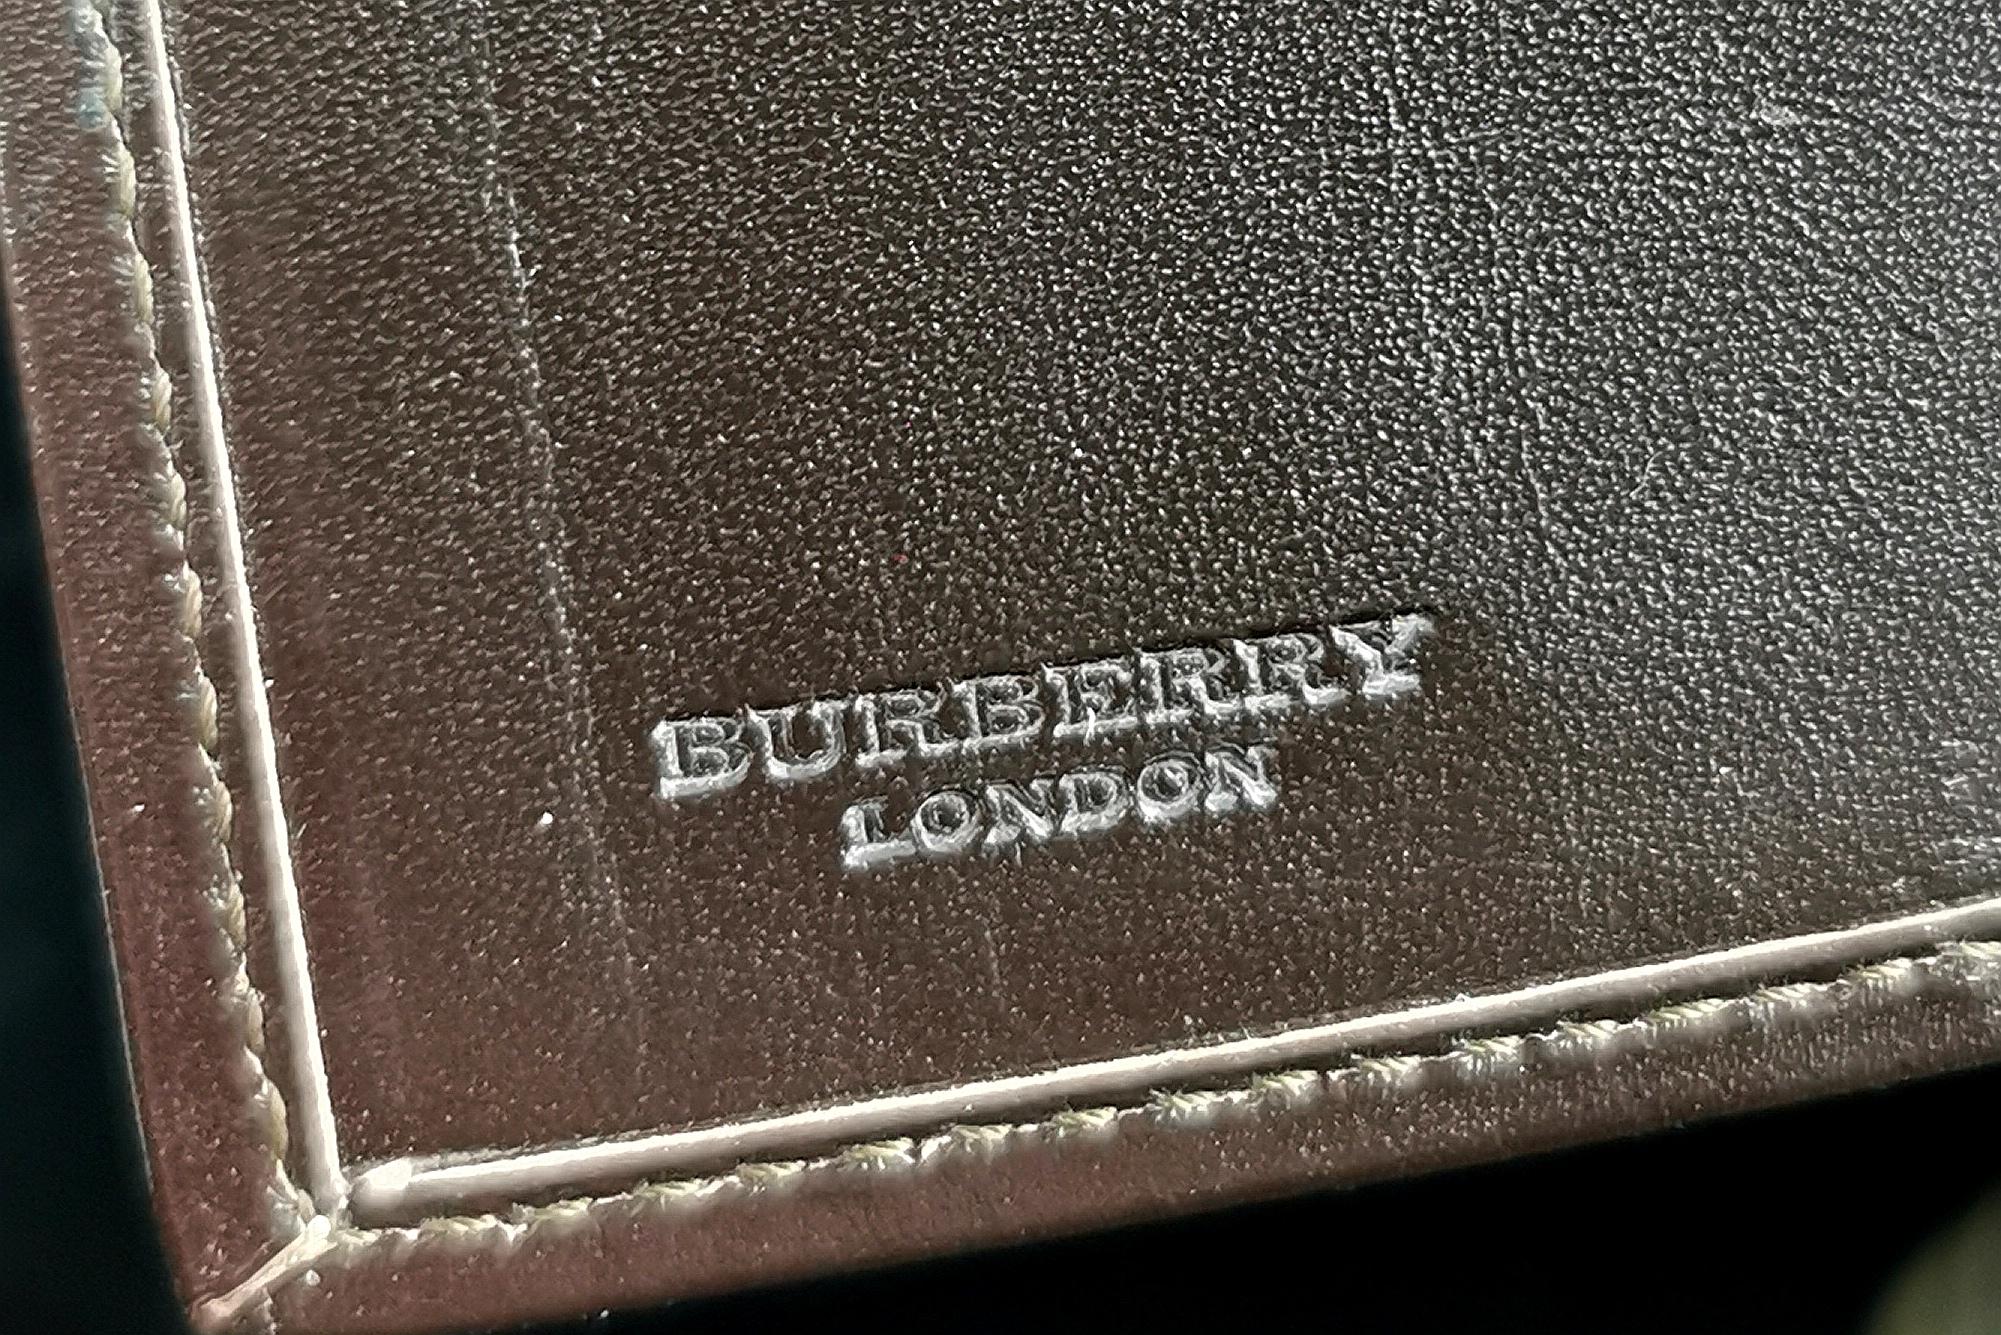 Vintage Burberry London notebook cover  For Sale 7